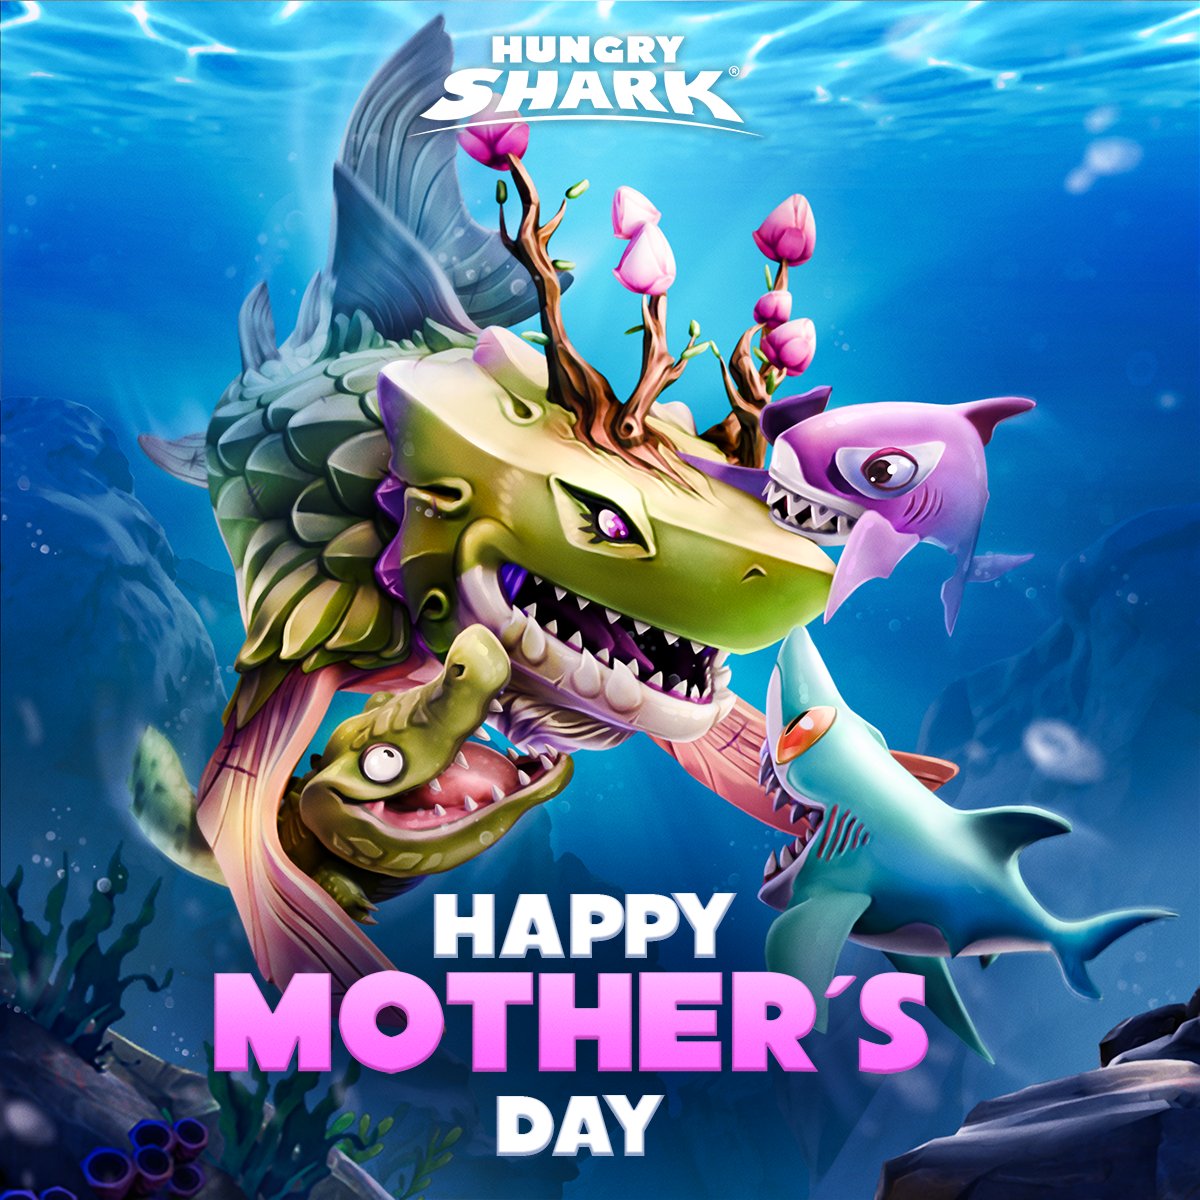 Happy Mother’s Day! 🦈 To all the incredible moms who navigate the wild tides of life, thank you for being our anchor and our compass. 💙🌊 #HungryShark #MothersDay